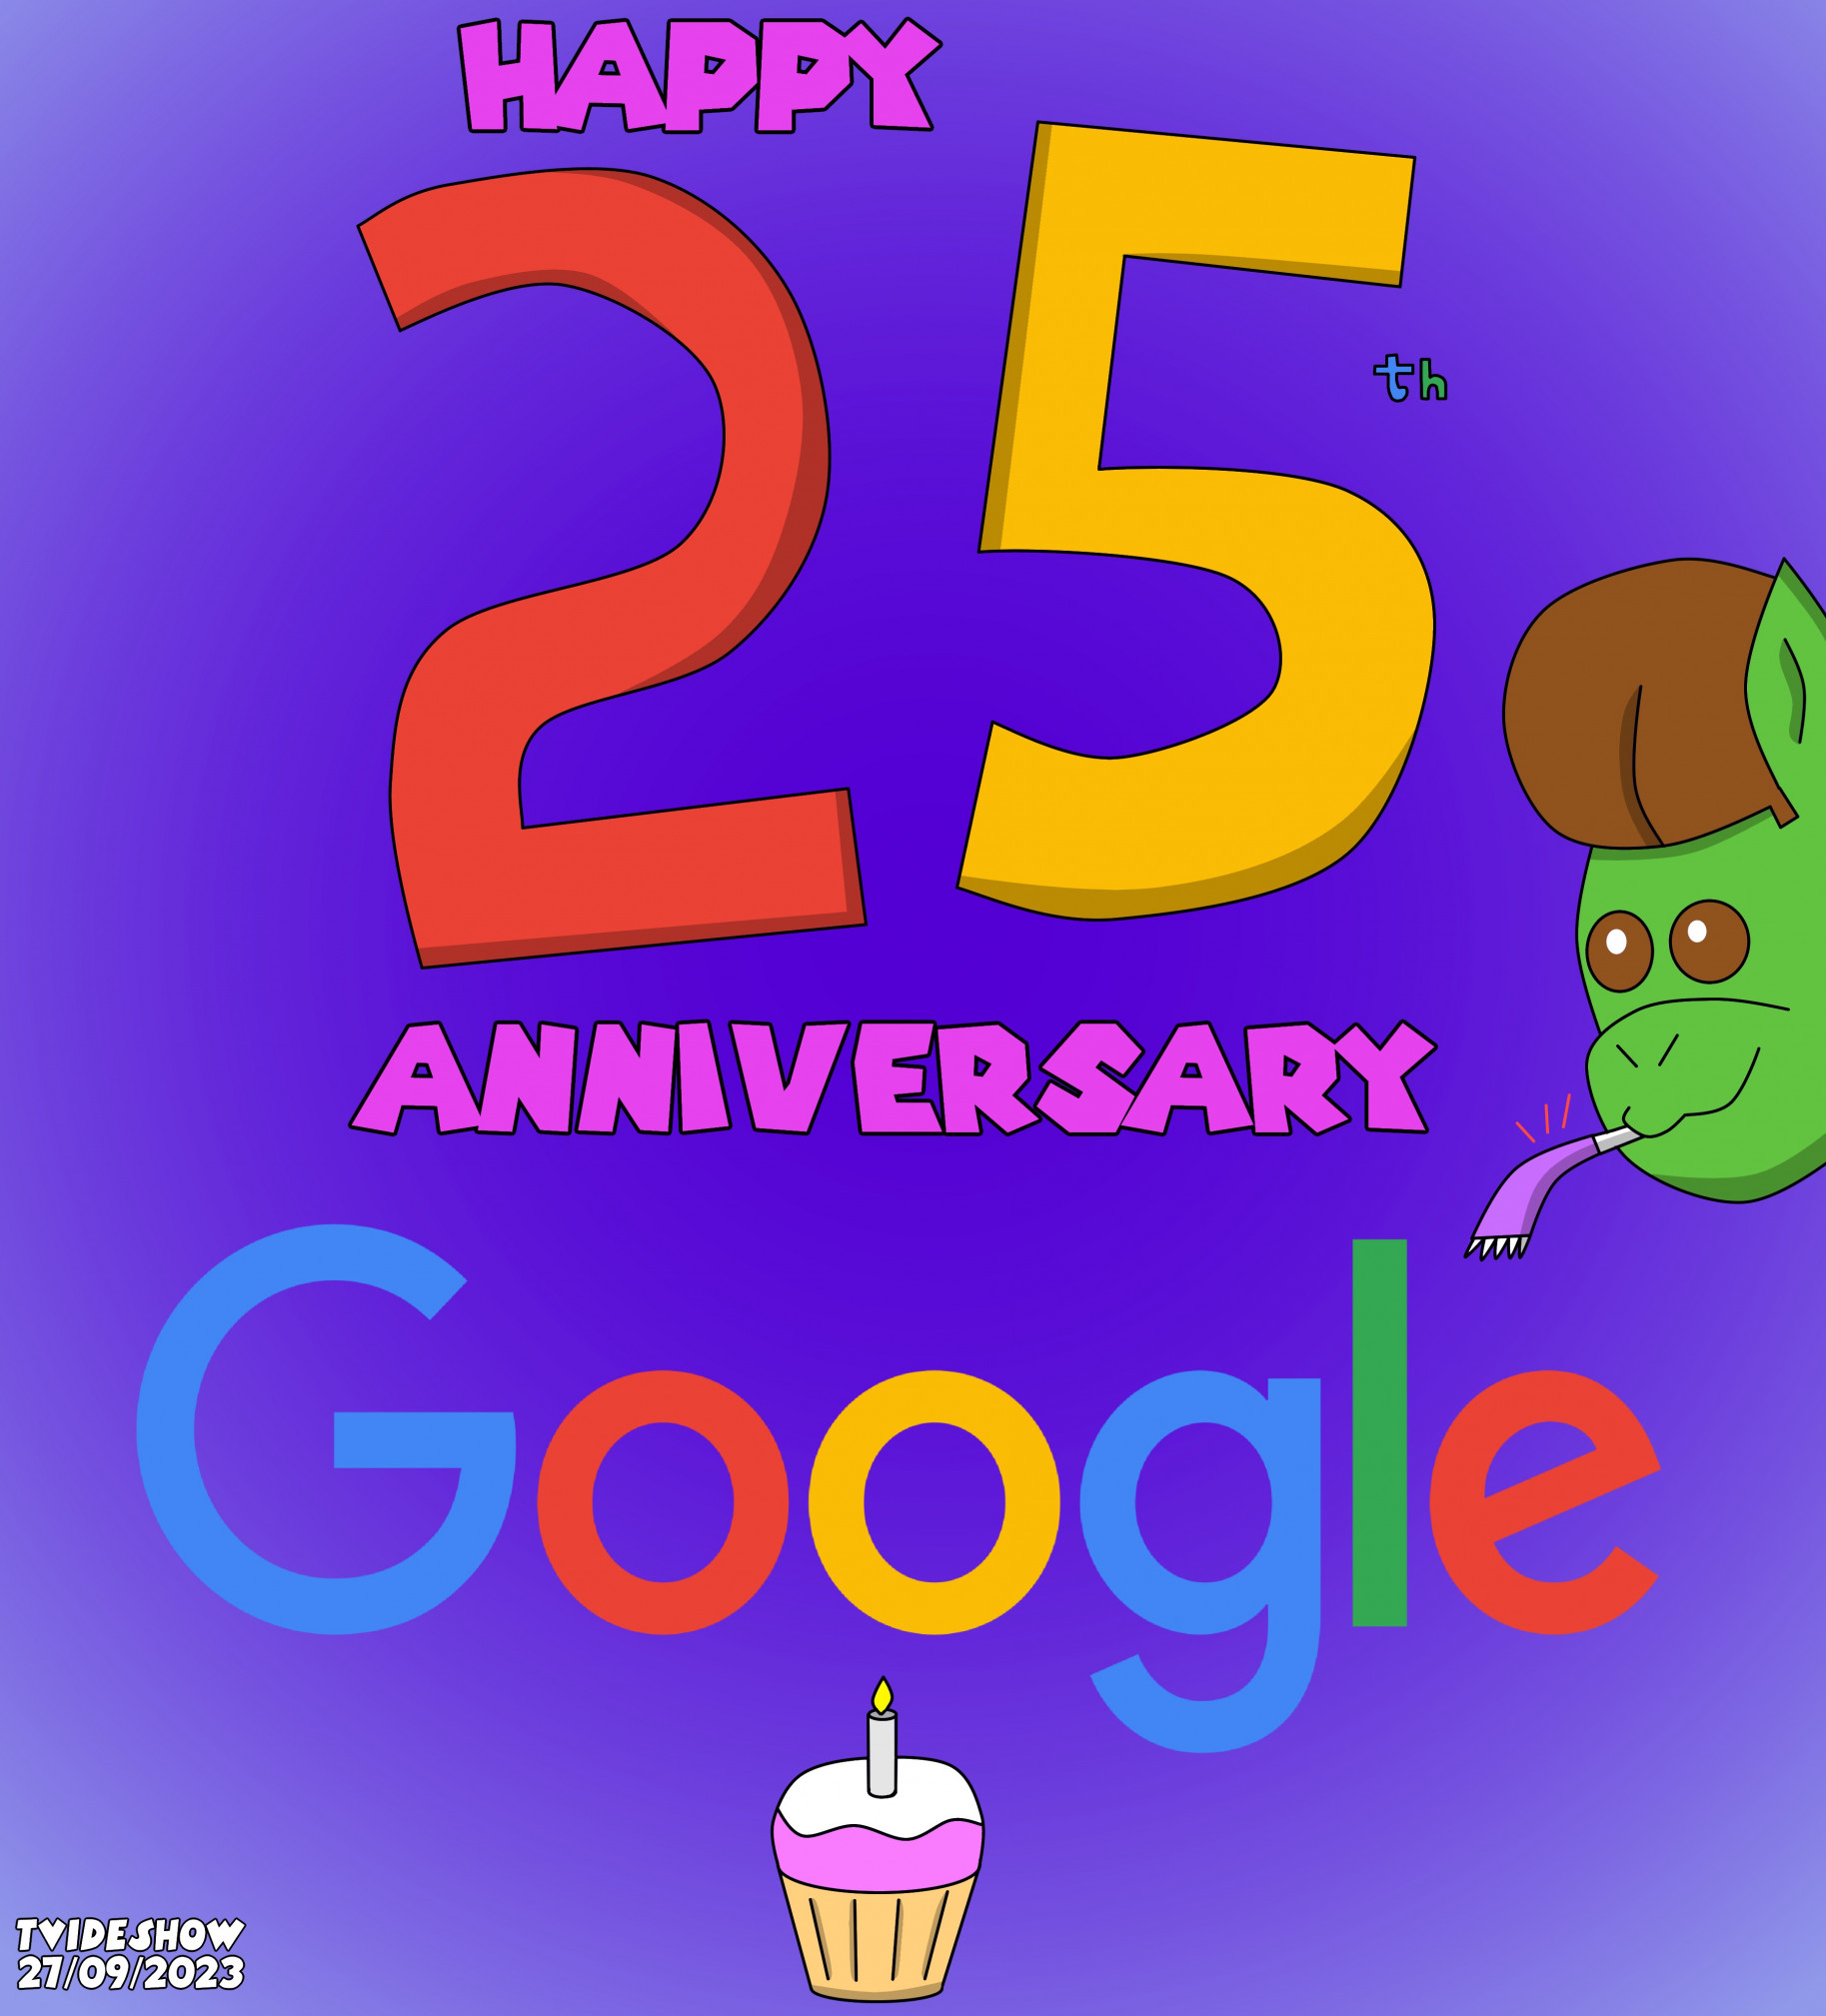 9 bizzare facts about Google on its 25th anniversary